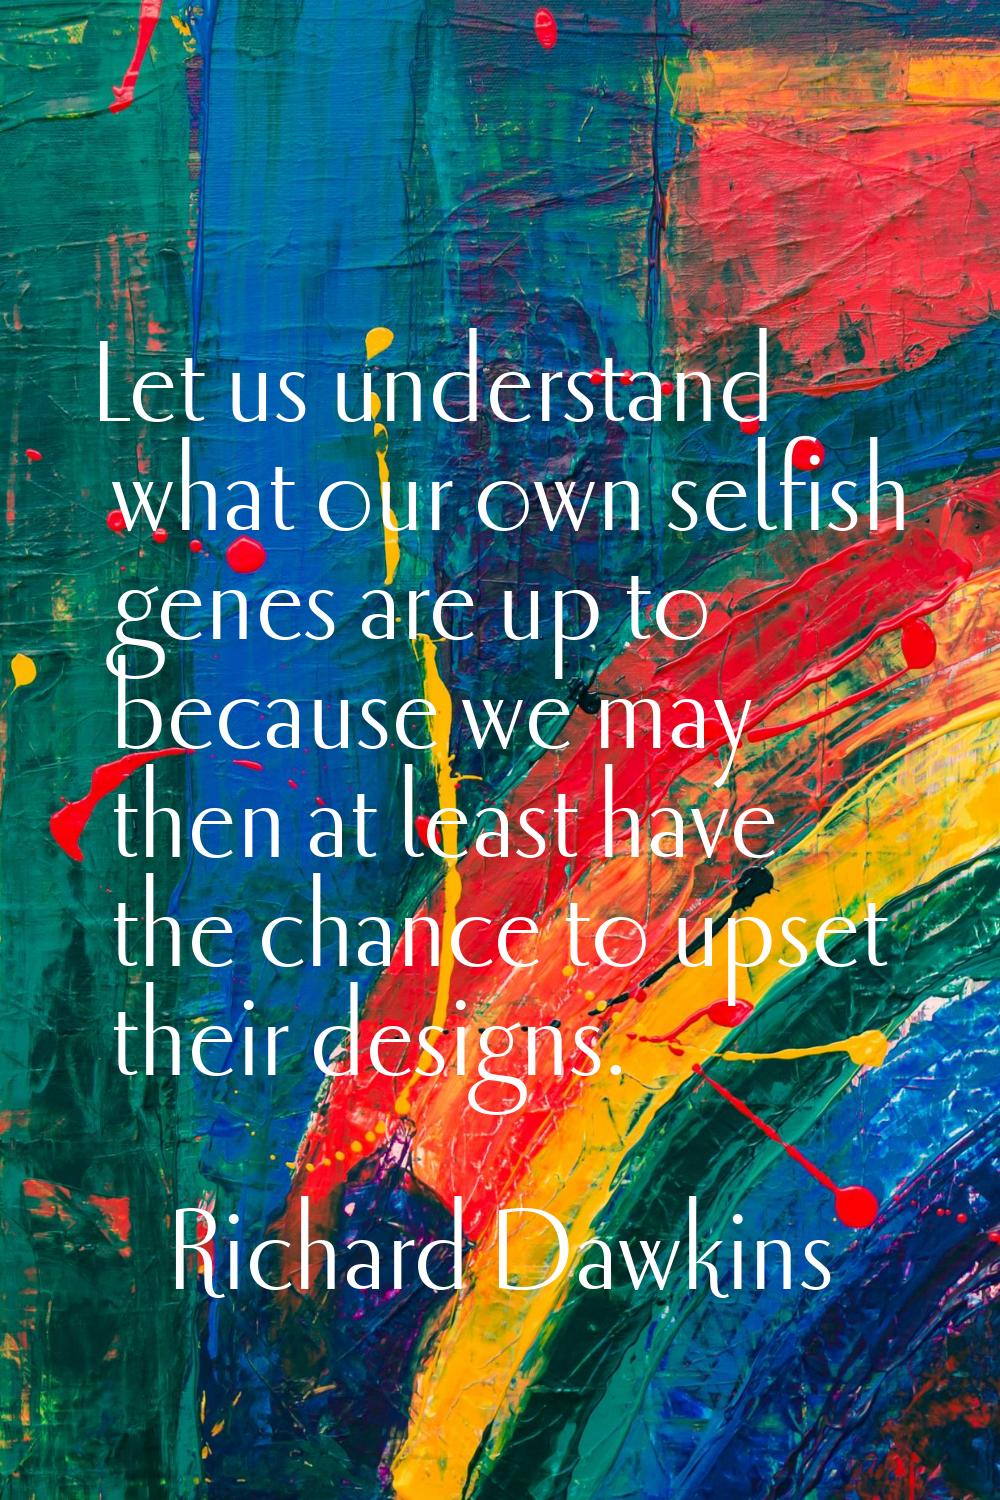 Let us understand what our own selfish genes are up to because we may then at least have the chance